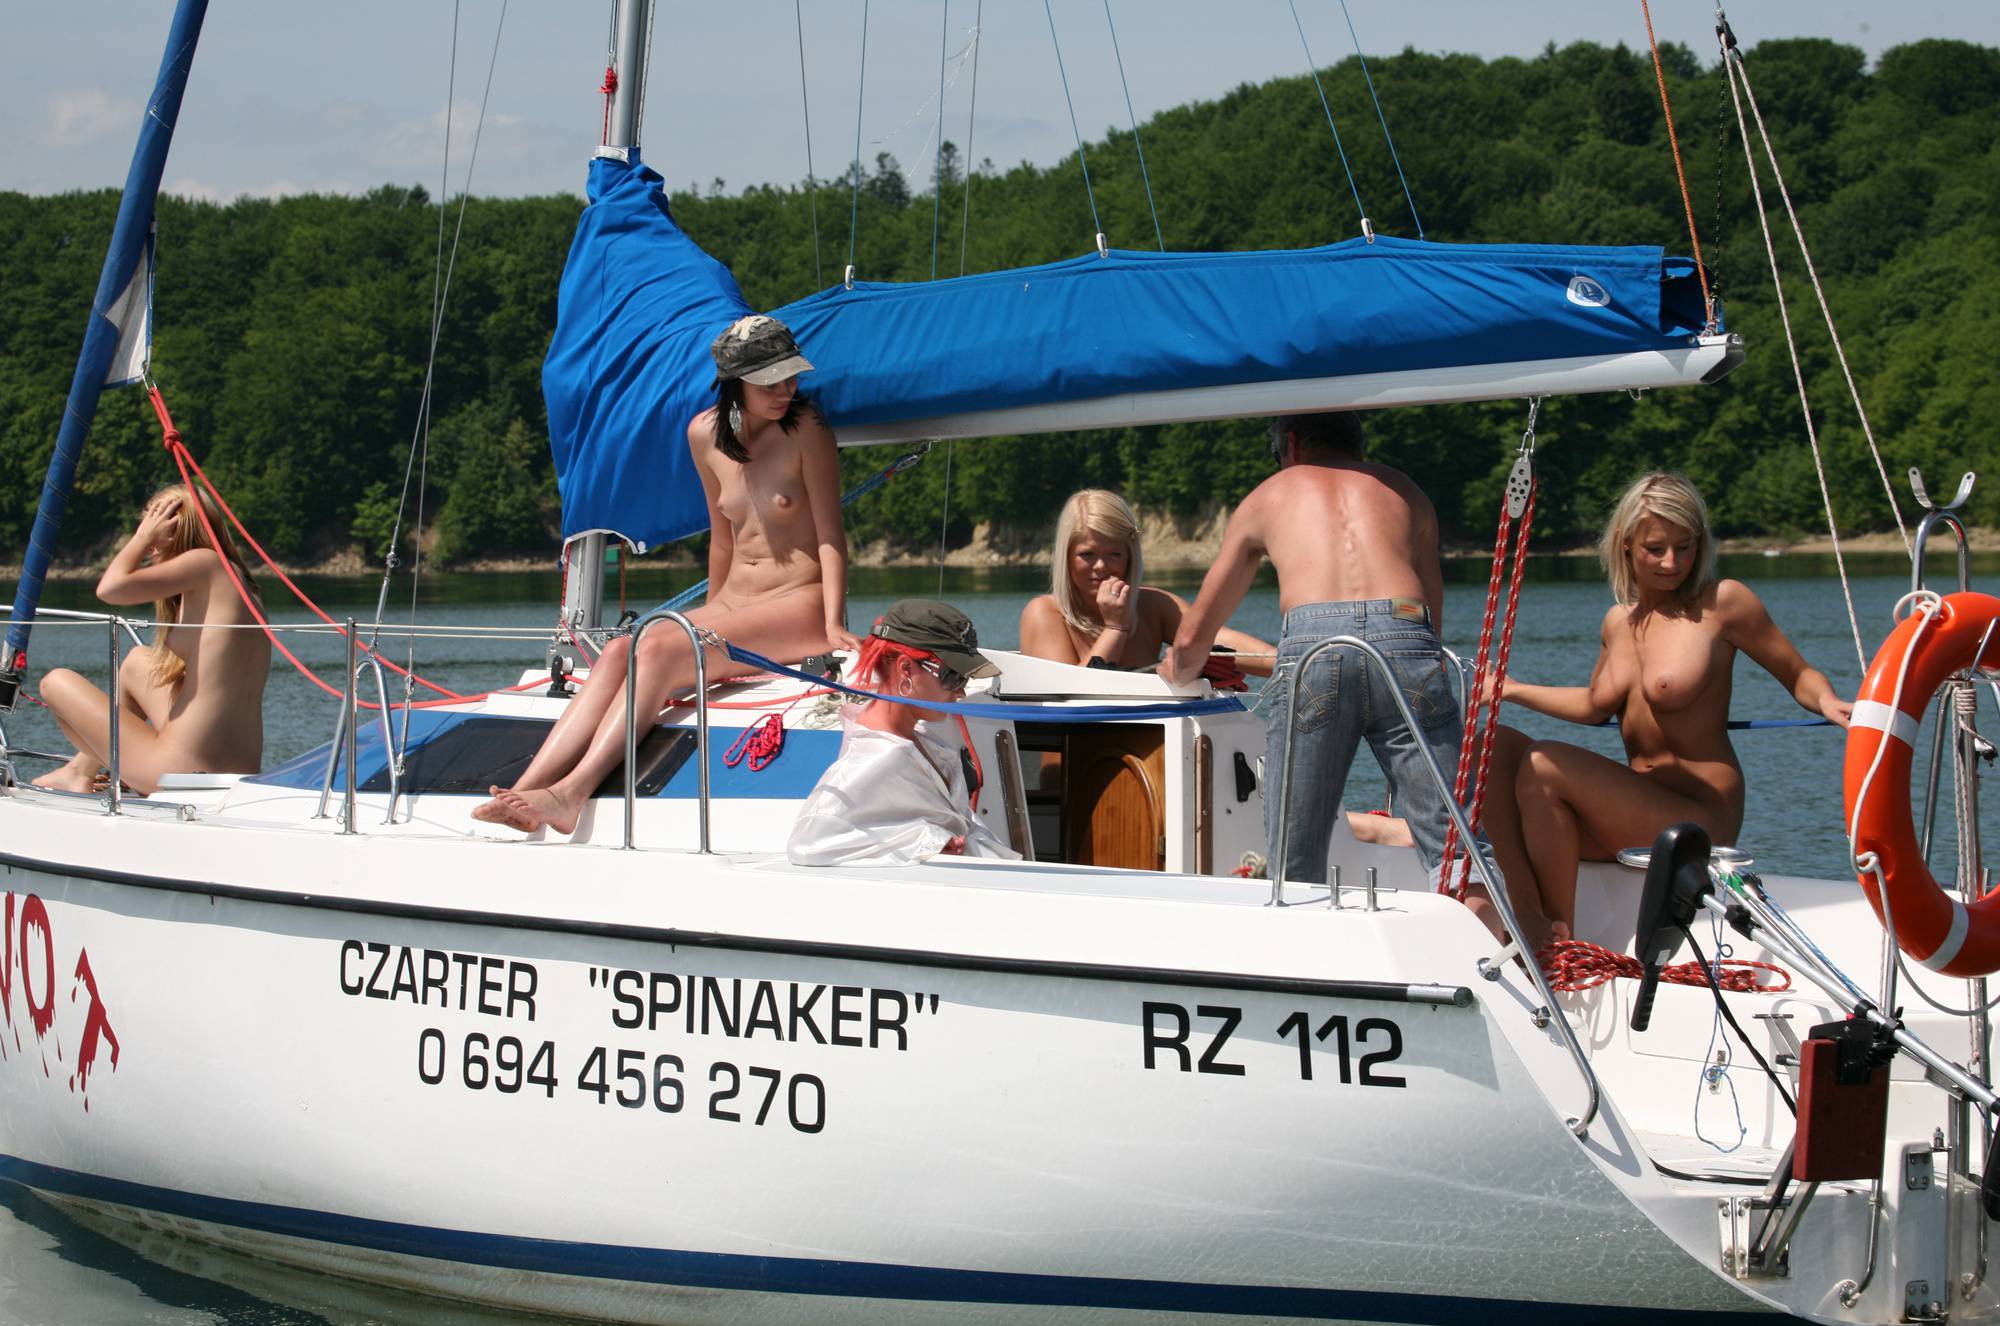 Nudist Pictures Seaworthy Piwot Yacht - 1